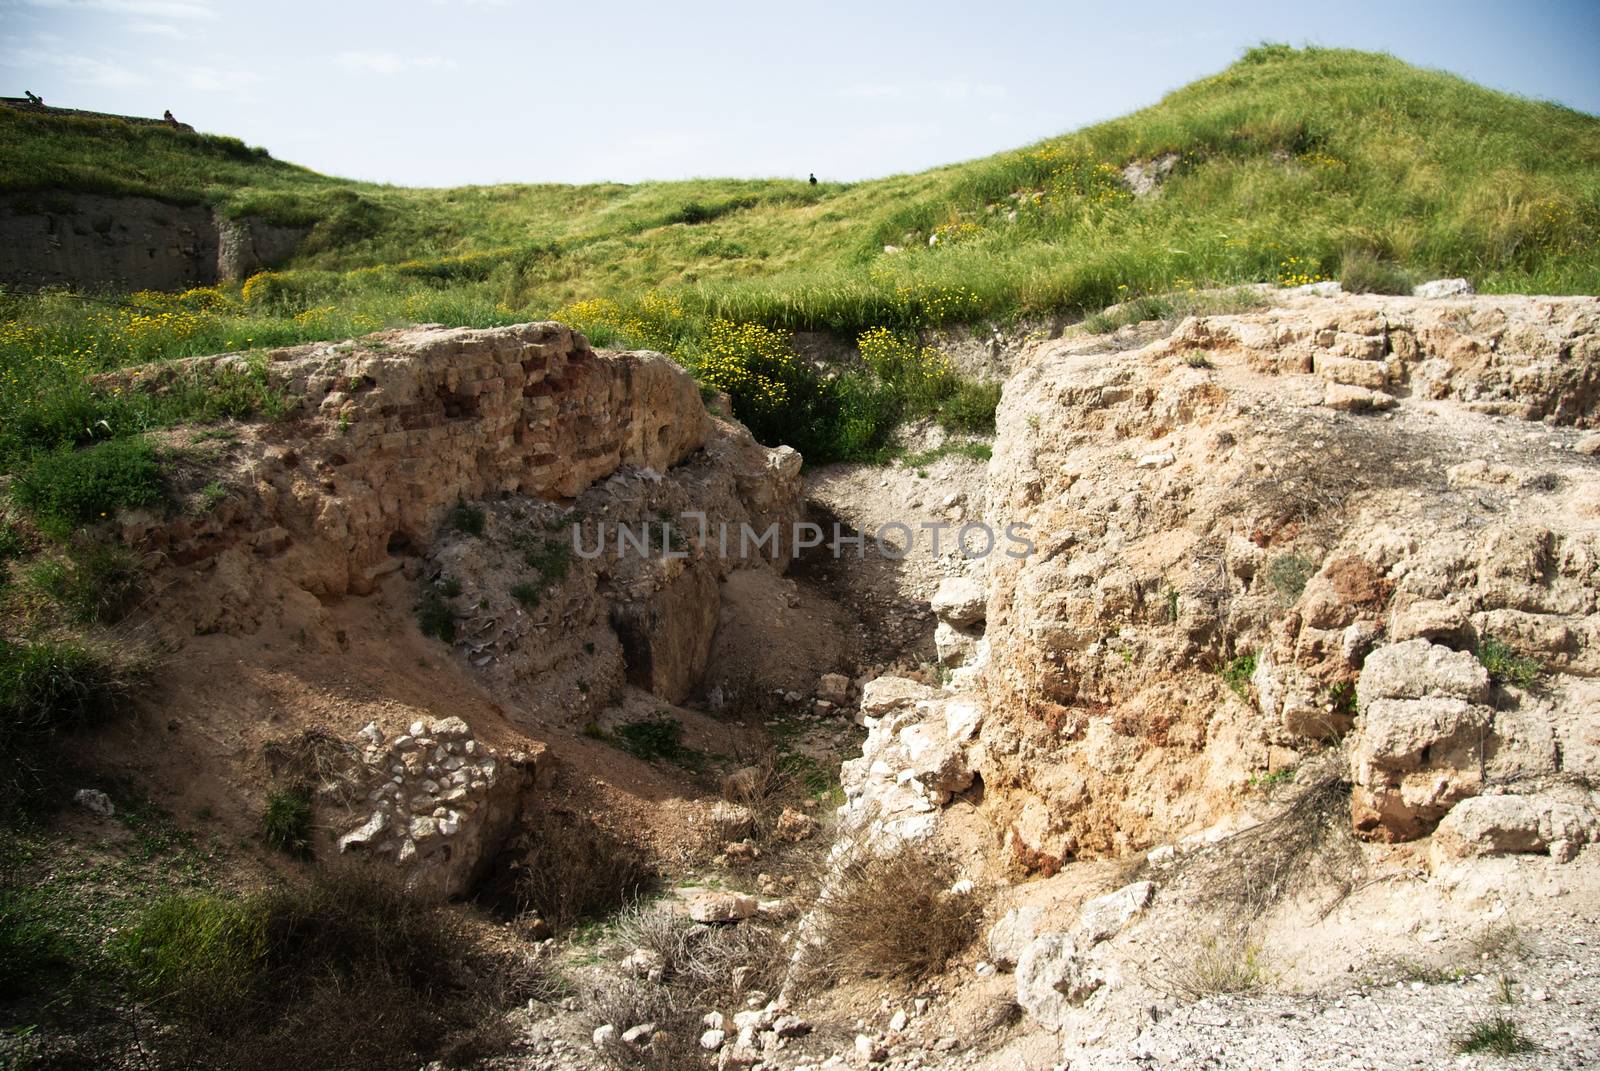 Archeology and history national park with spring landscape in Israel